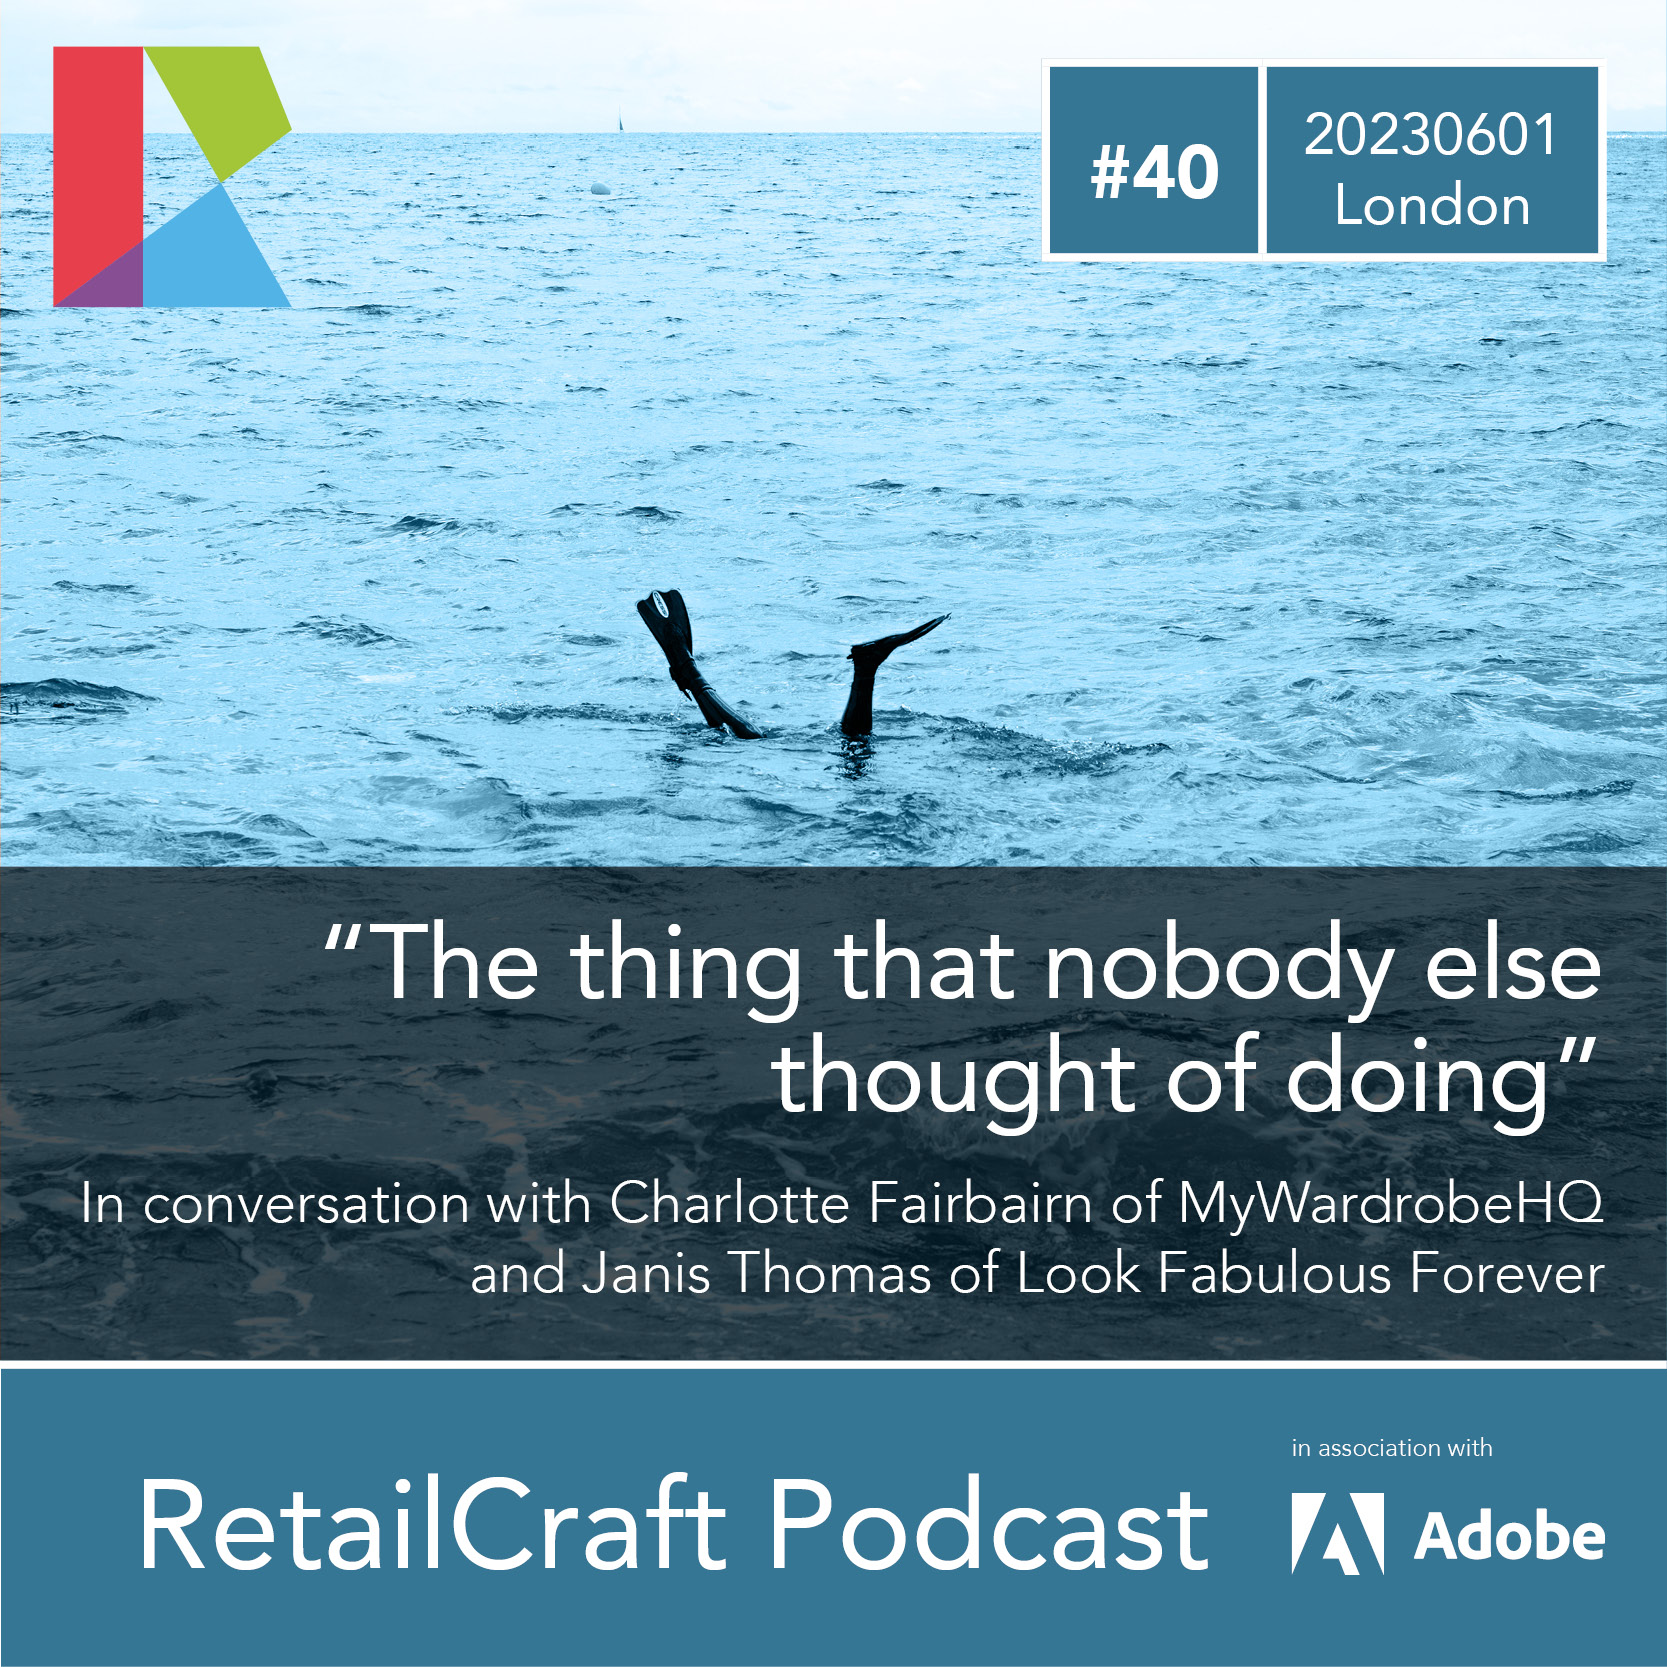 RetailCraft Podcast #40 – MyWardrobeHQ and Look Fabulous Forever